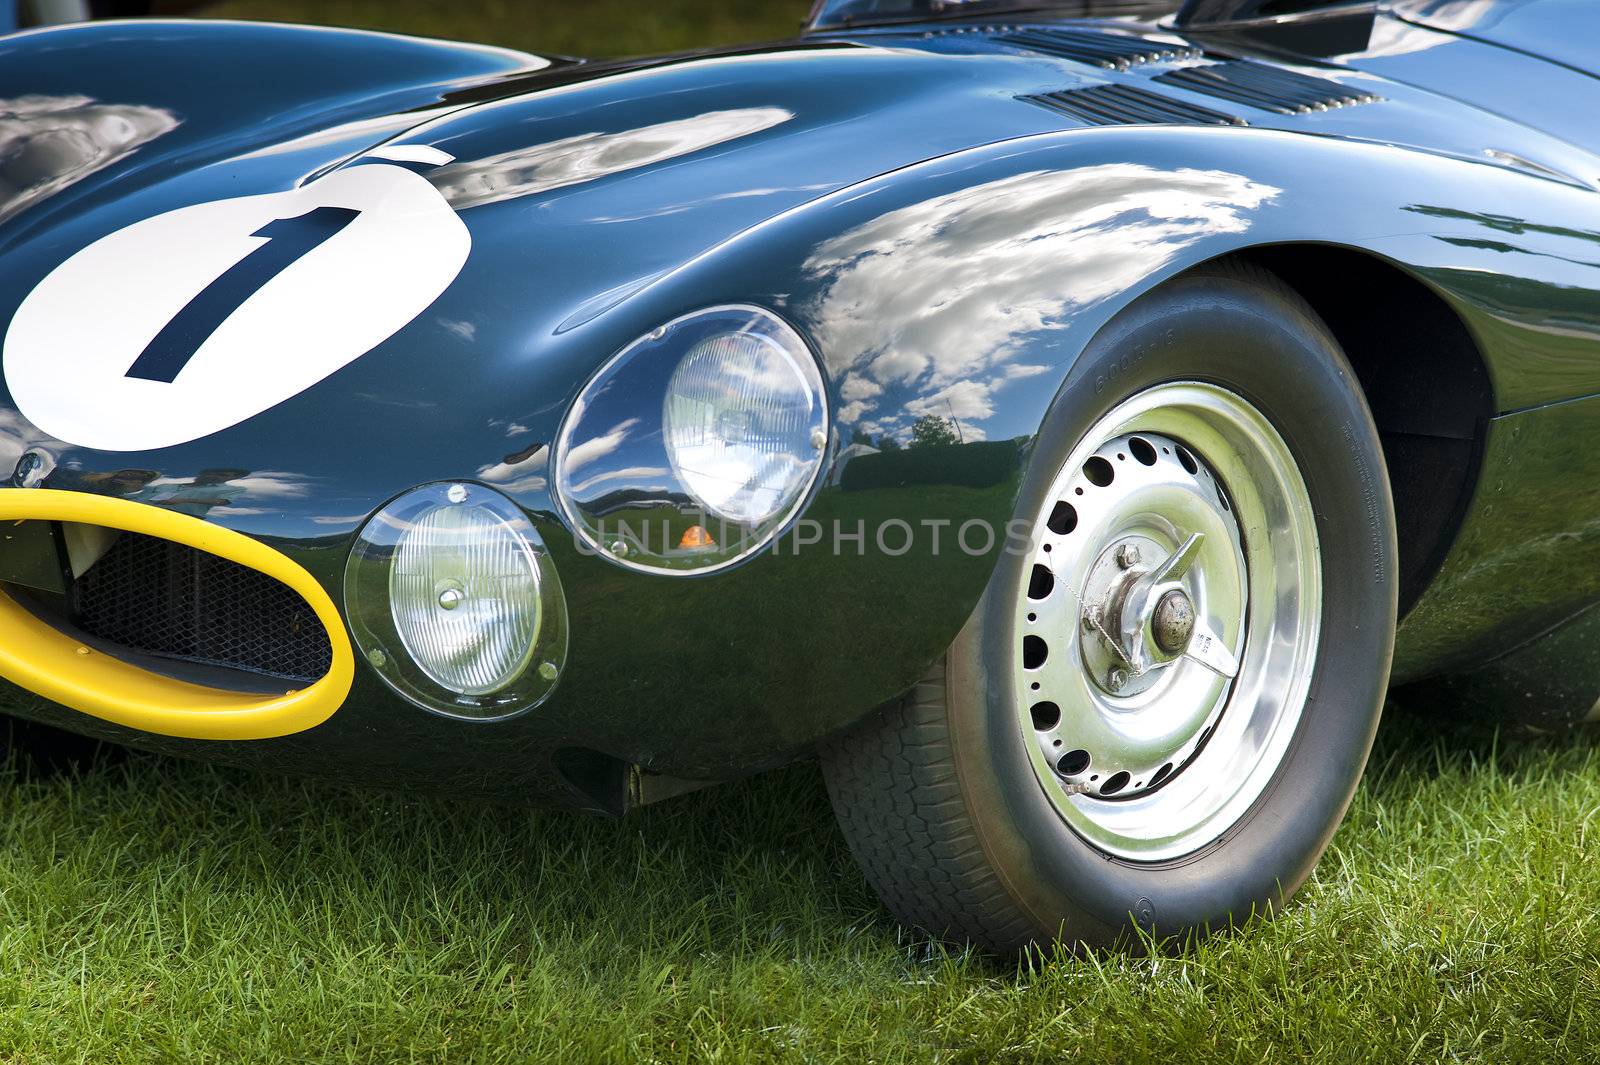 Vintage racecar by f/2sumicron